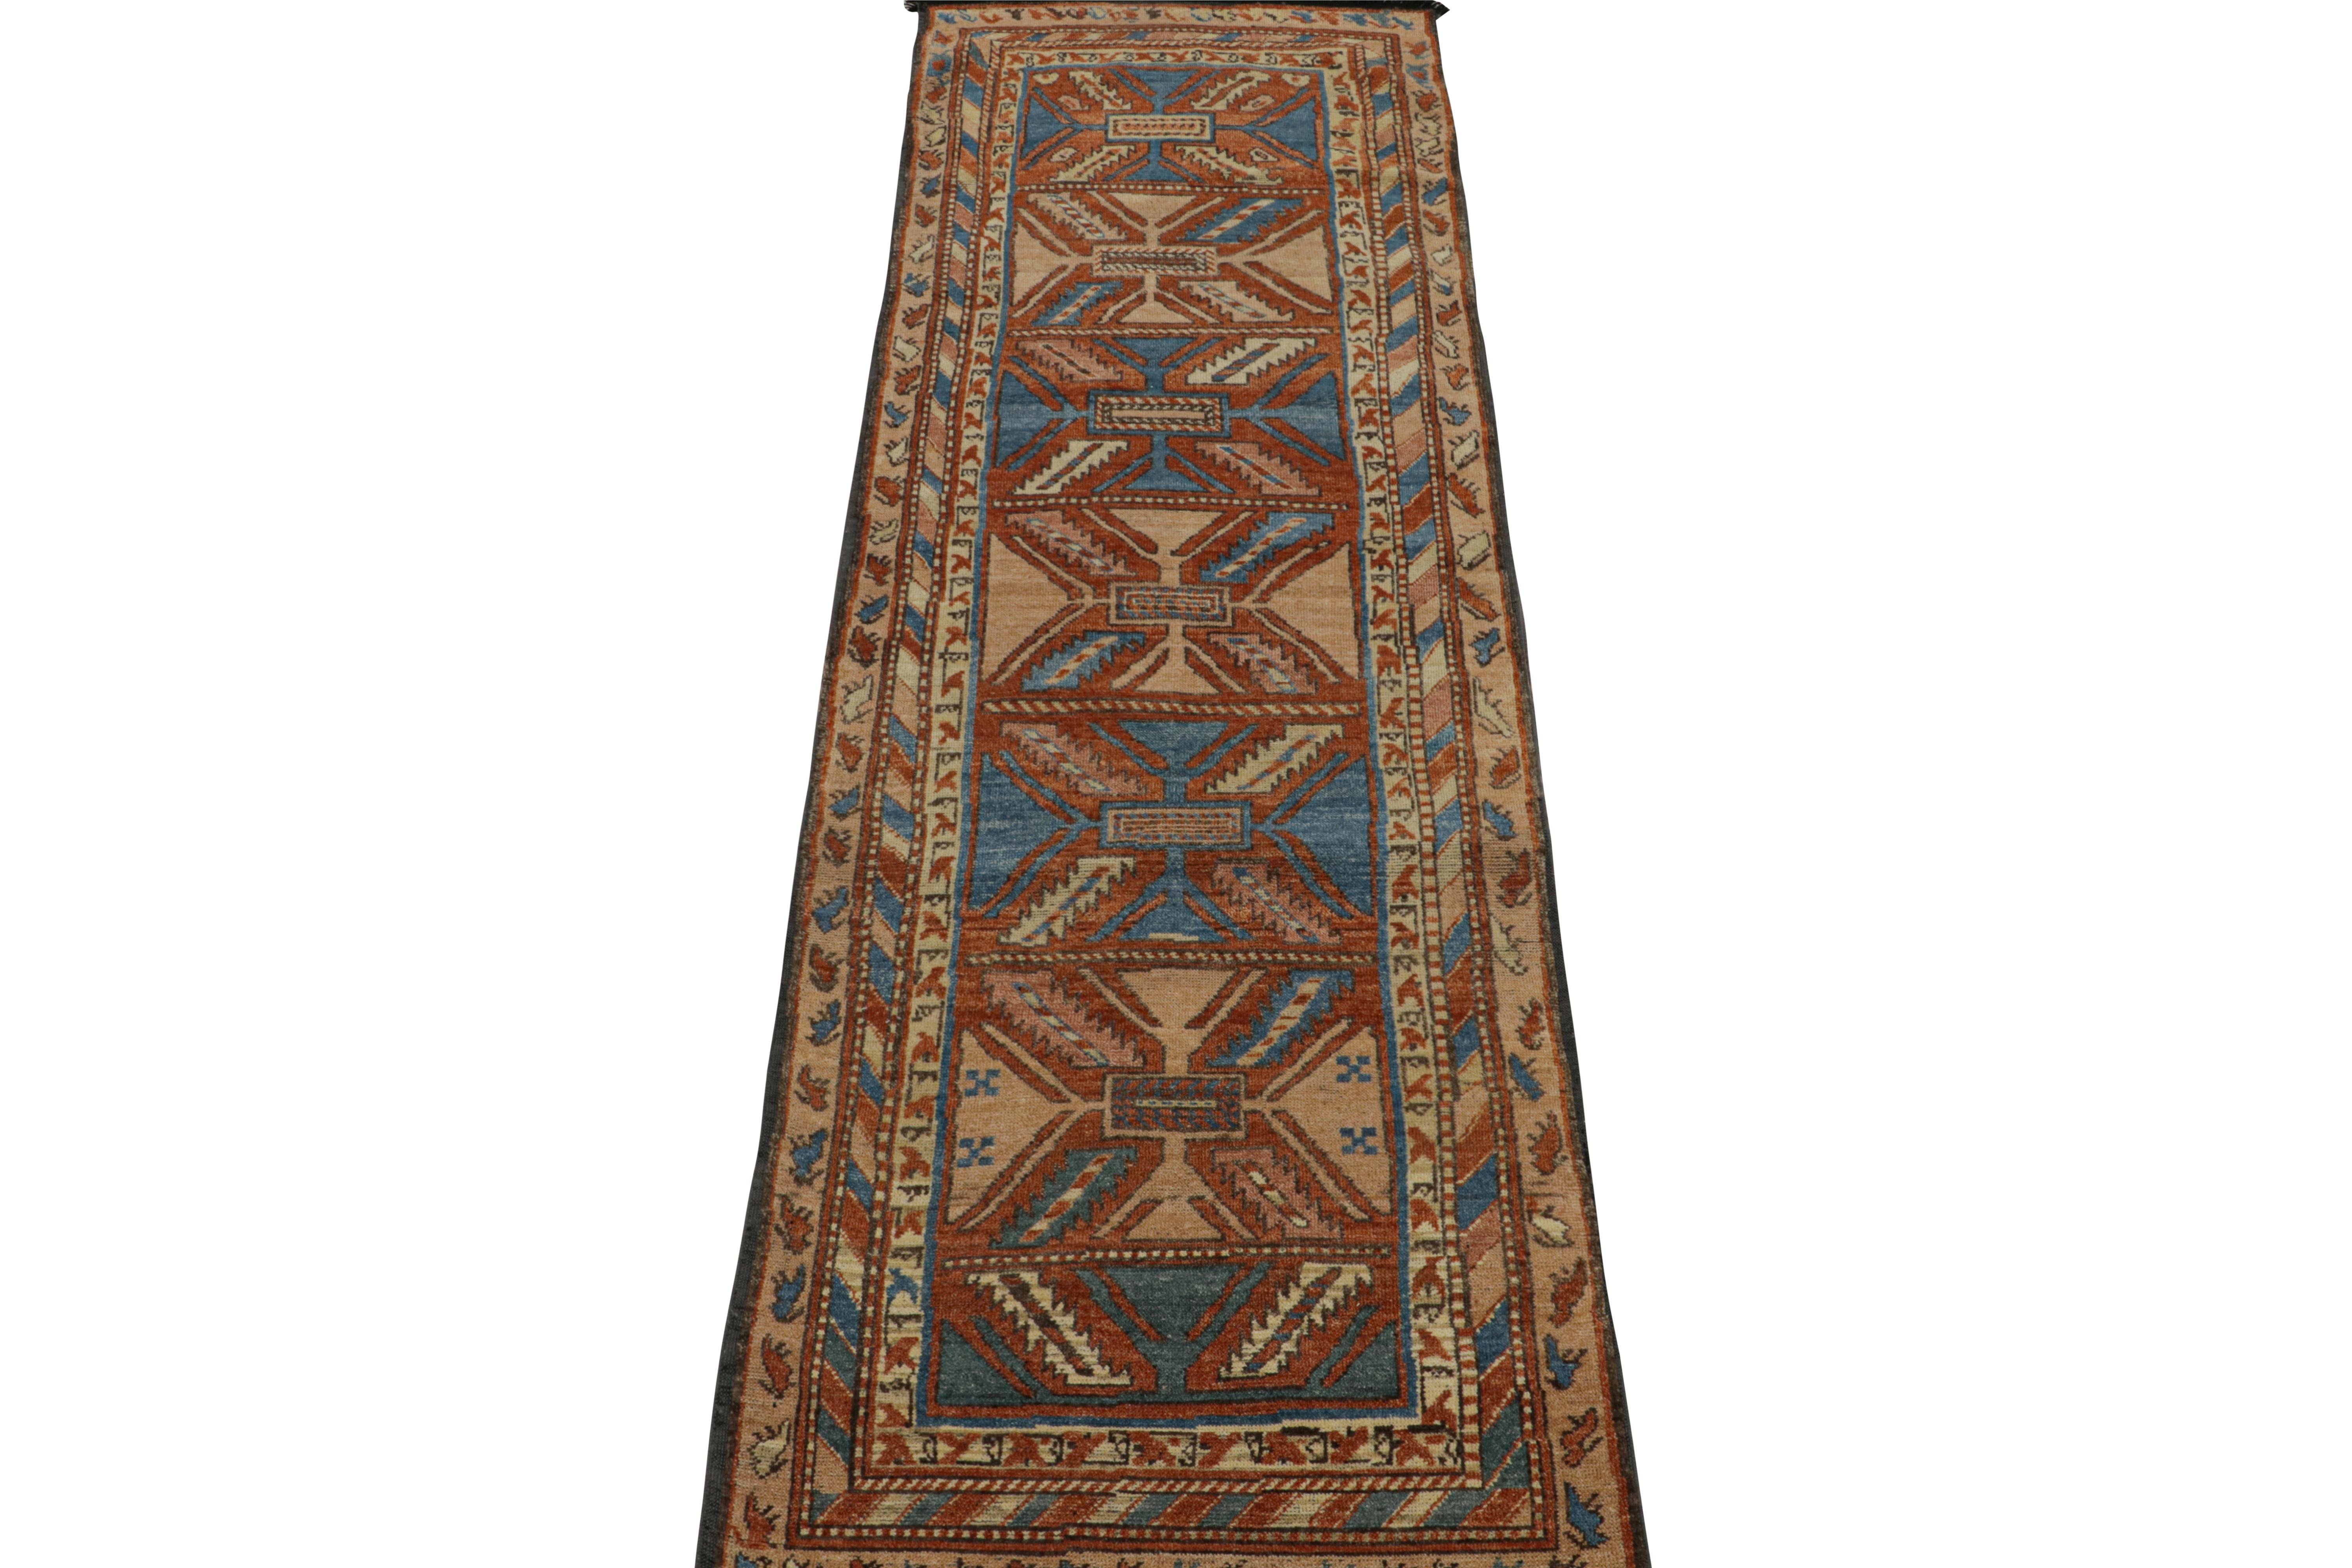 Indian Rug & Kilim’s Tribal Style Runner Rug in Beige, Red and Blue Geometric Patterns For Sale